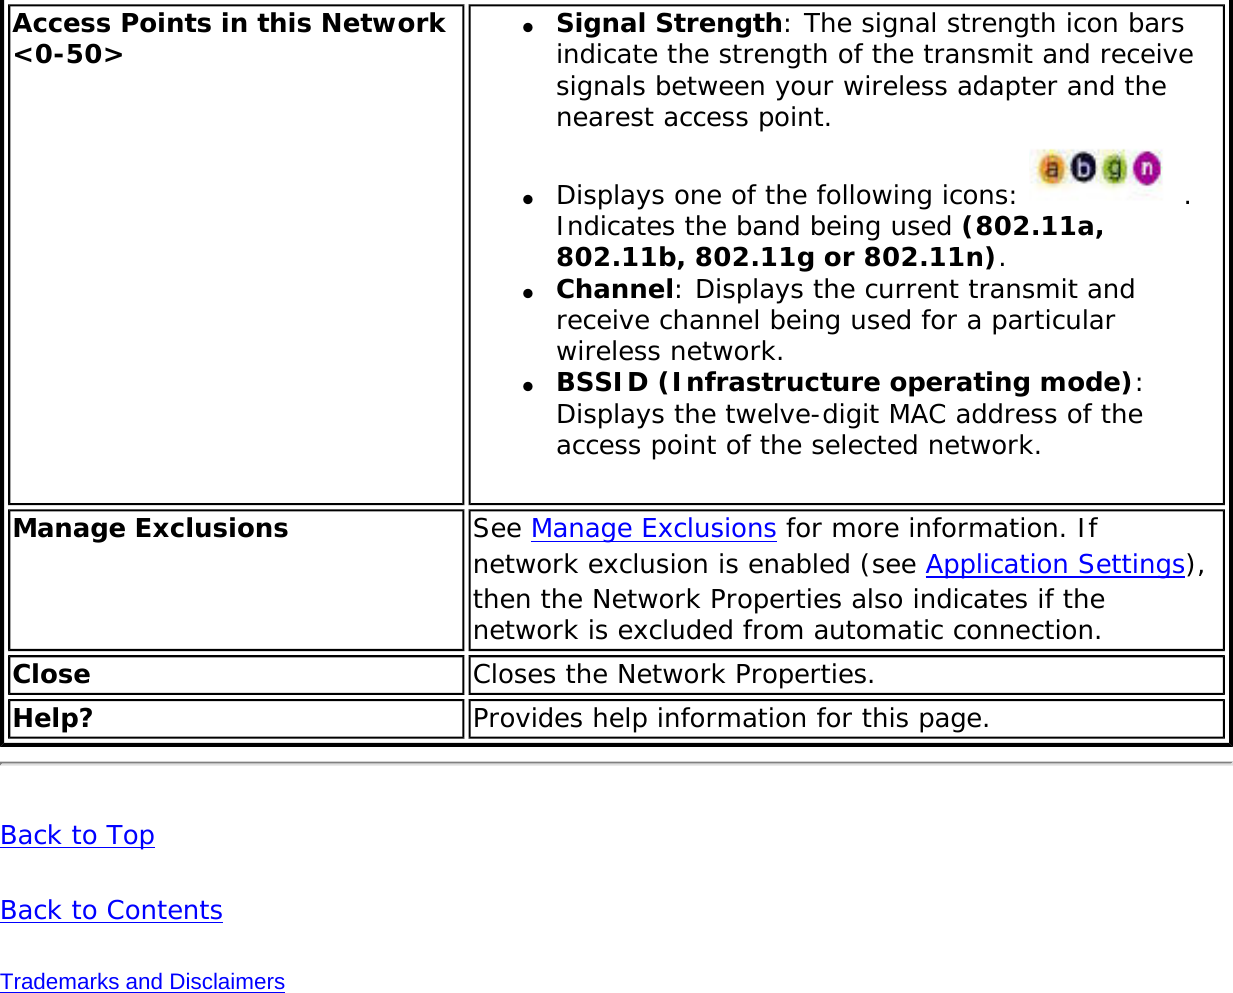 Access Points in this Network &lt;0-50&gt; ●     Signal Strength: The signal strength icon bars indicate the strength of the transmit and receive signals between your wireless adapter and the nearest access point.●     Displays one of the following icons:  . Indicates the band being used (802.11a, 802.11b, 802.11g or 802.11n). ●     Channel: Displays the current transmit and receive channel being used for a particular wireless network.●     BSSID (Infrastructure operating mode): Displays the twelve-digit MAC address of the access point of the selected network. Manage Exclusions  See Manage Exclusions for more information. If network exclusion is enabled (see Application Settings), then the Network Properties also indicates if the network is excluded from automatic connection.Close  Closes the Network Properties. Help? Provides help information for this page.Back to TopBack to ContentsTrademarks and Disclaimers